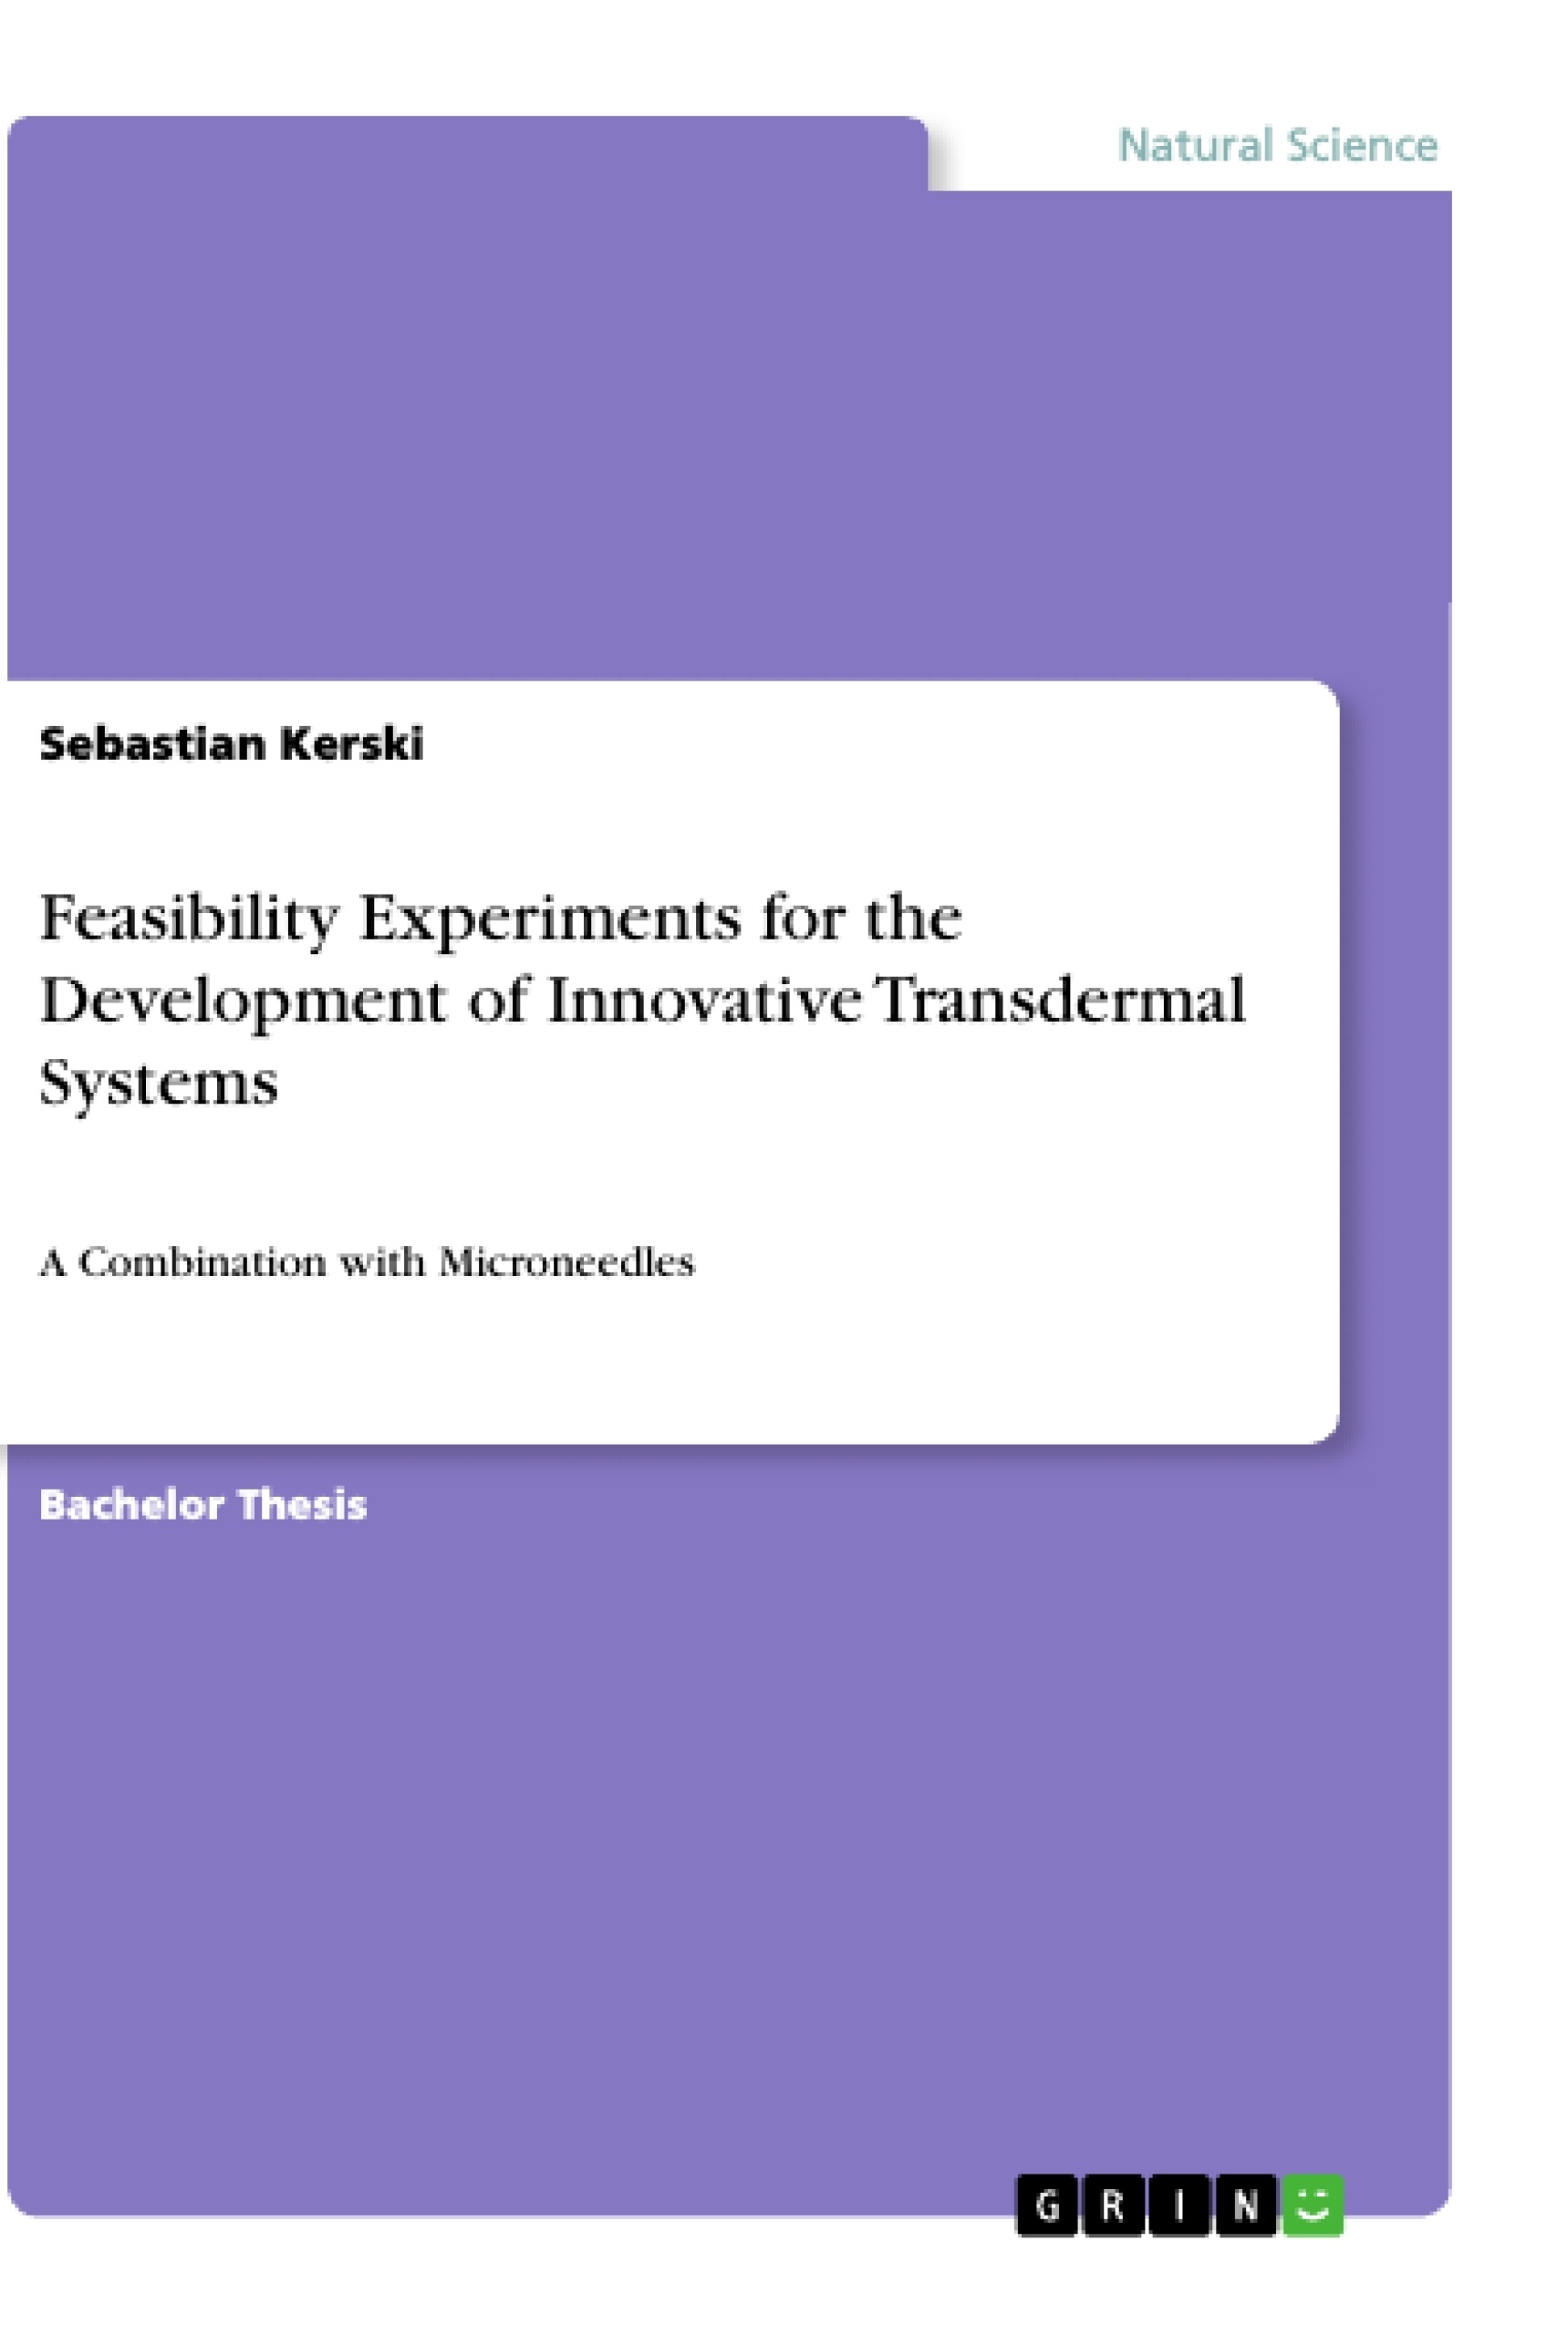 Title: Feasibility Experiments for the Development of Innovative Transdermal Systems